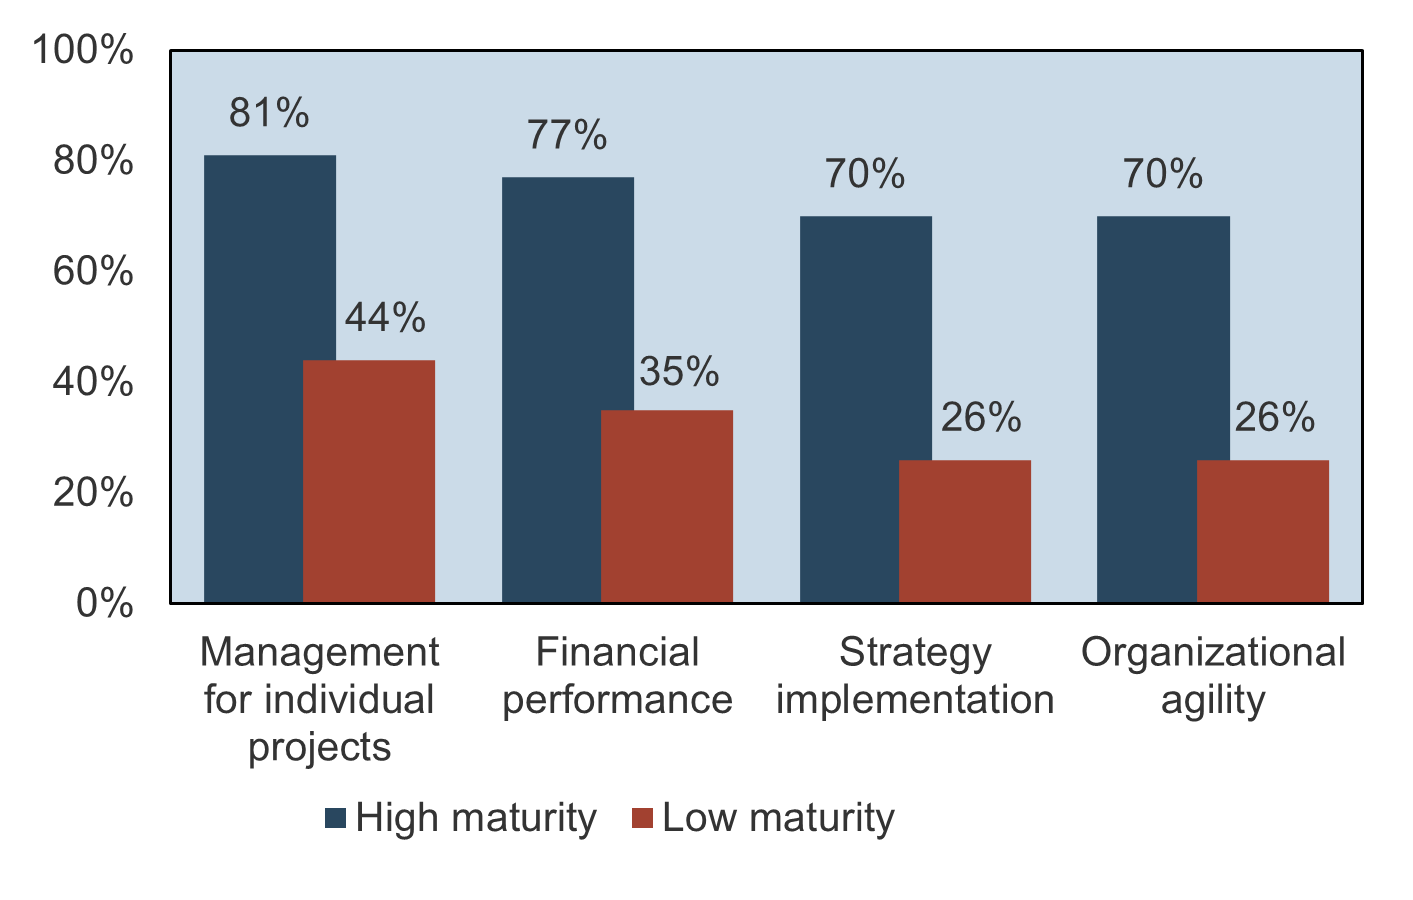 A double bar graph is depicted to show high PPM maturity yields measurable benefits. It covers 4 categories: Management for individual projects, financial performance, strategy implementation, and organizational agility.